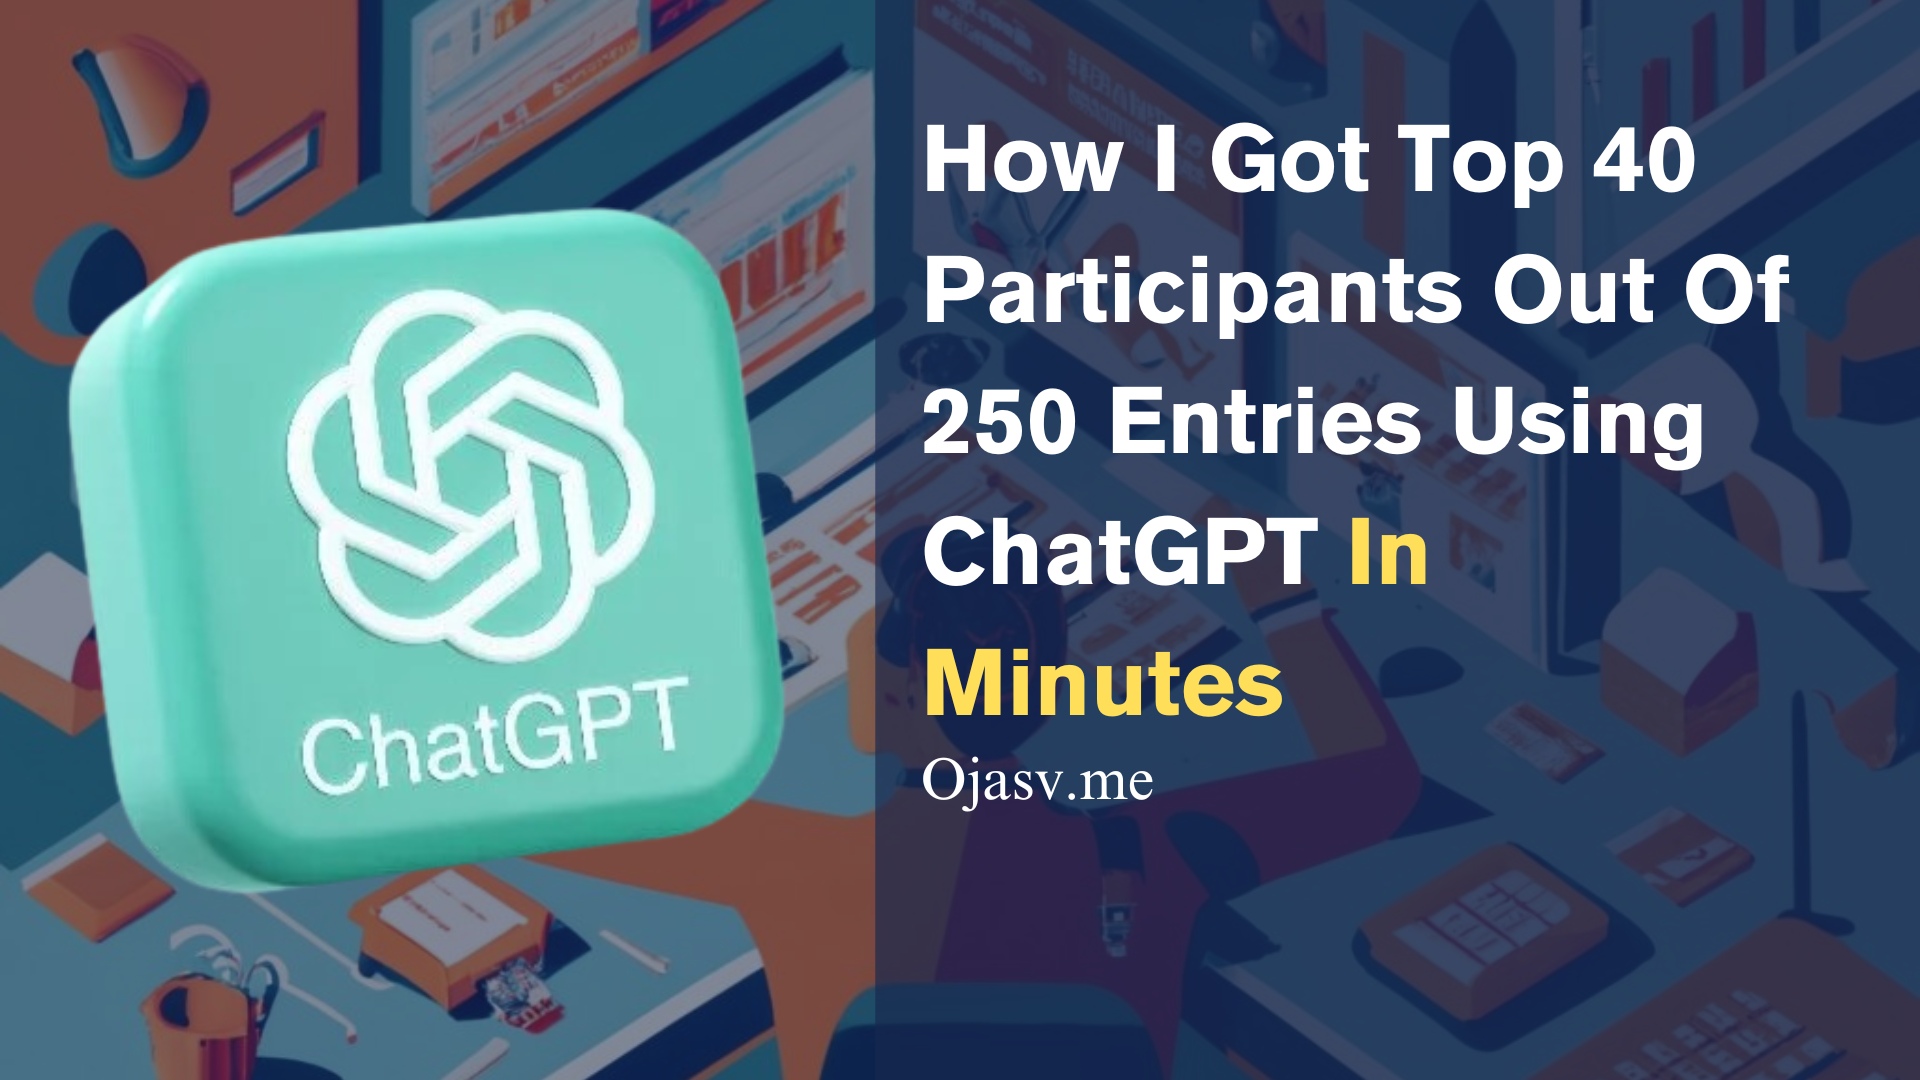 How I Got Top 40 Participants Out Of 250 Entries Using ChatGPT In Minutes